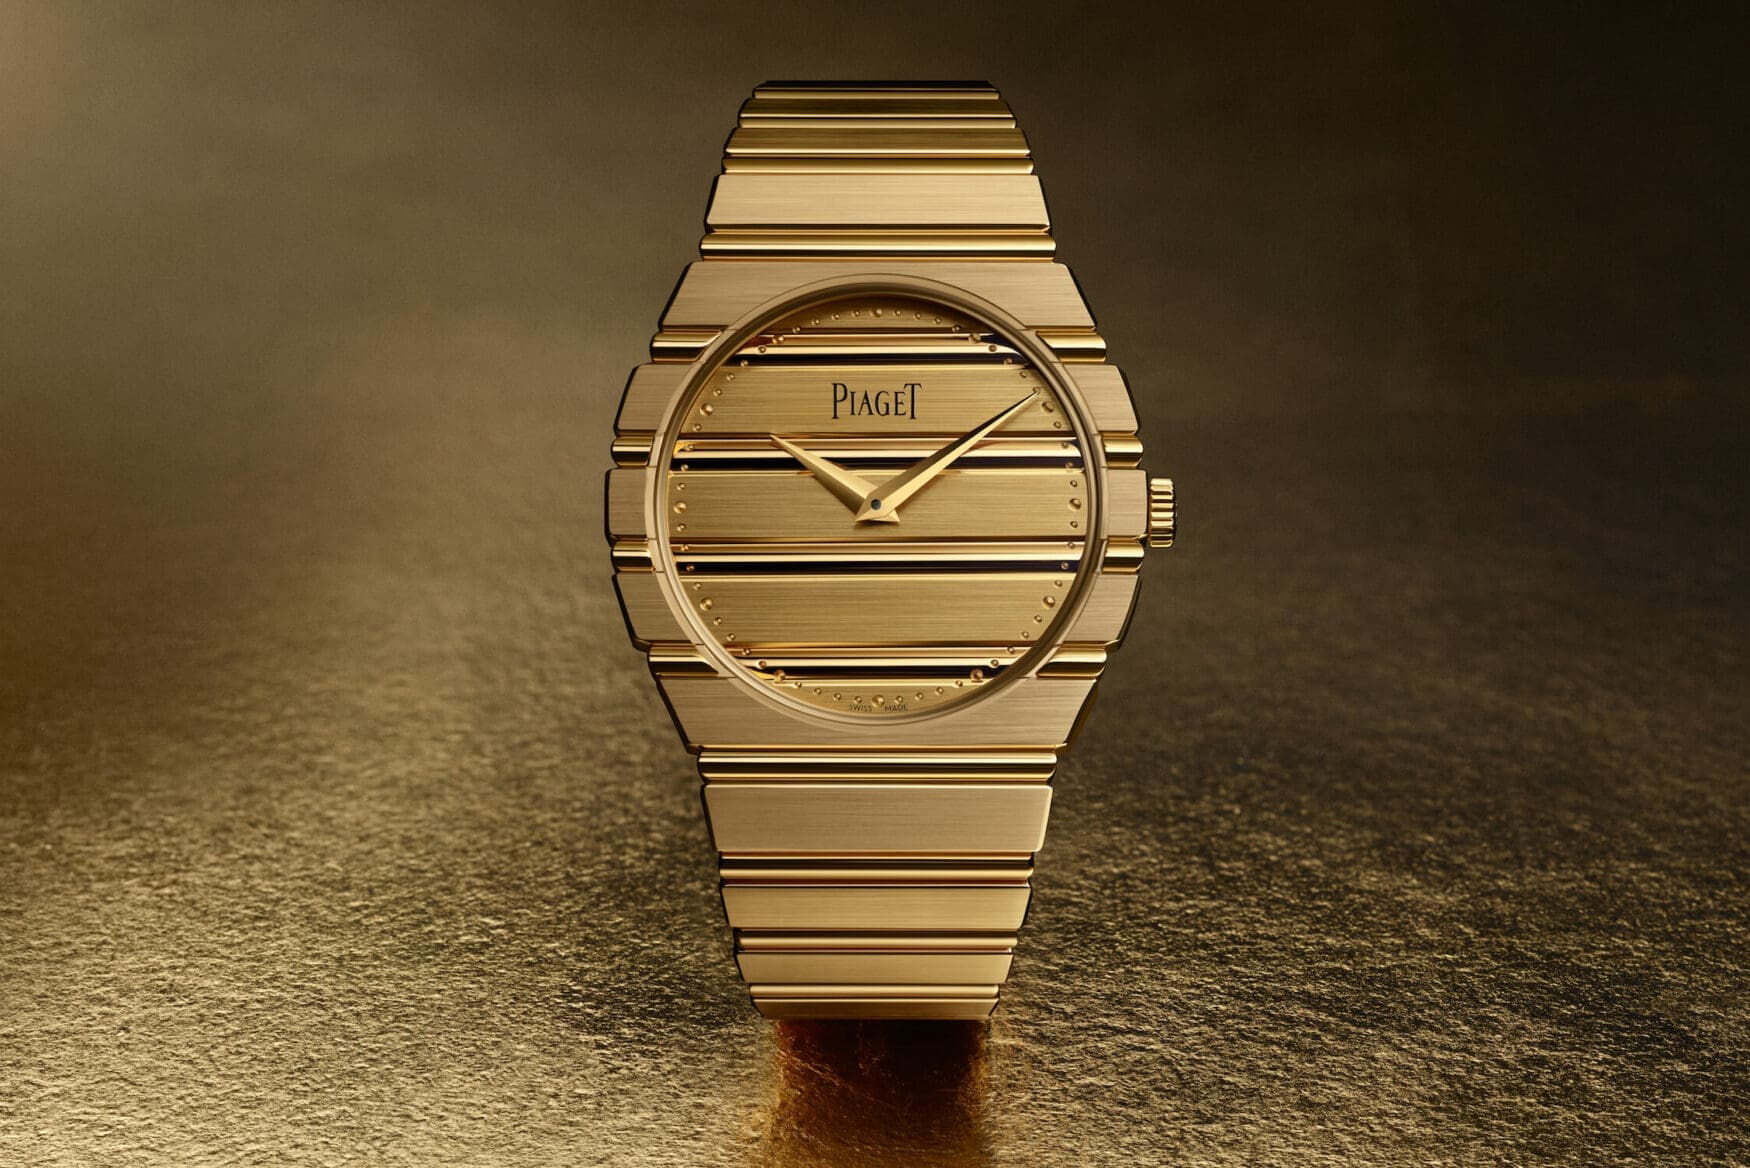 The new Piaget Polo 79 rivals beloved retro legends like the 222